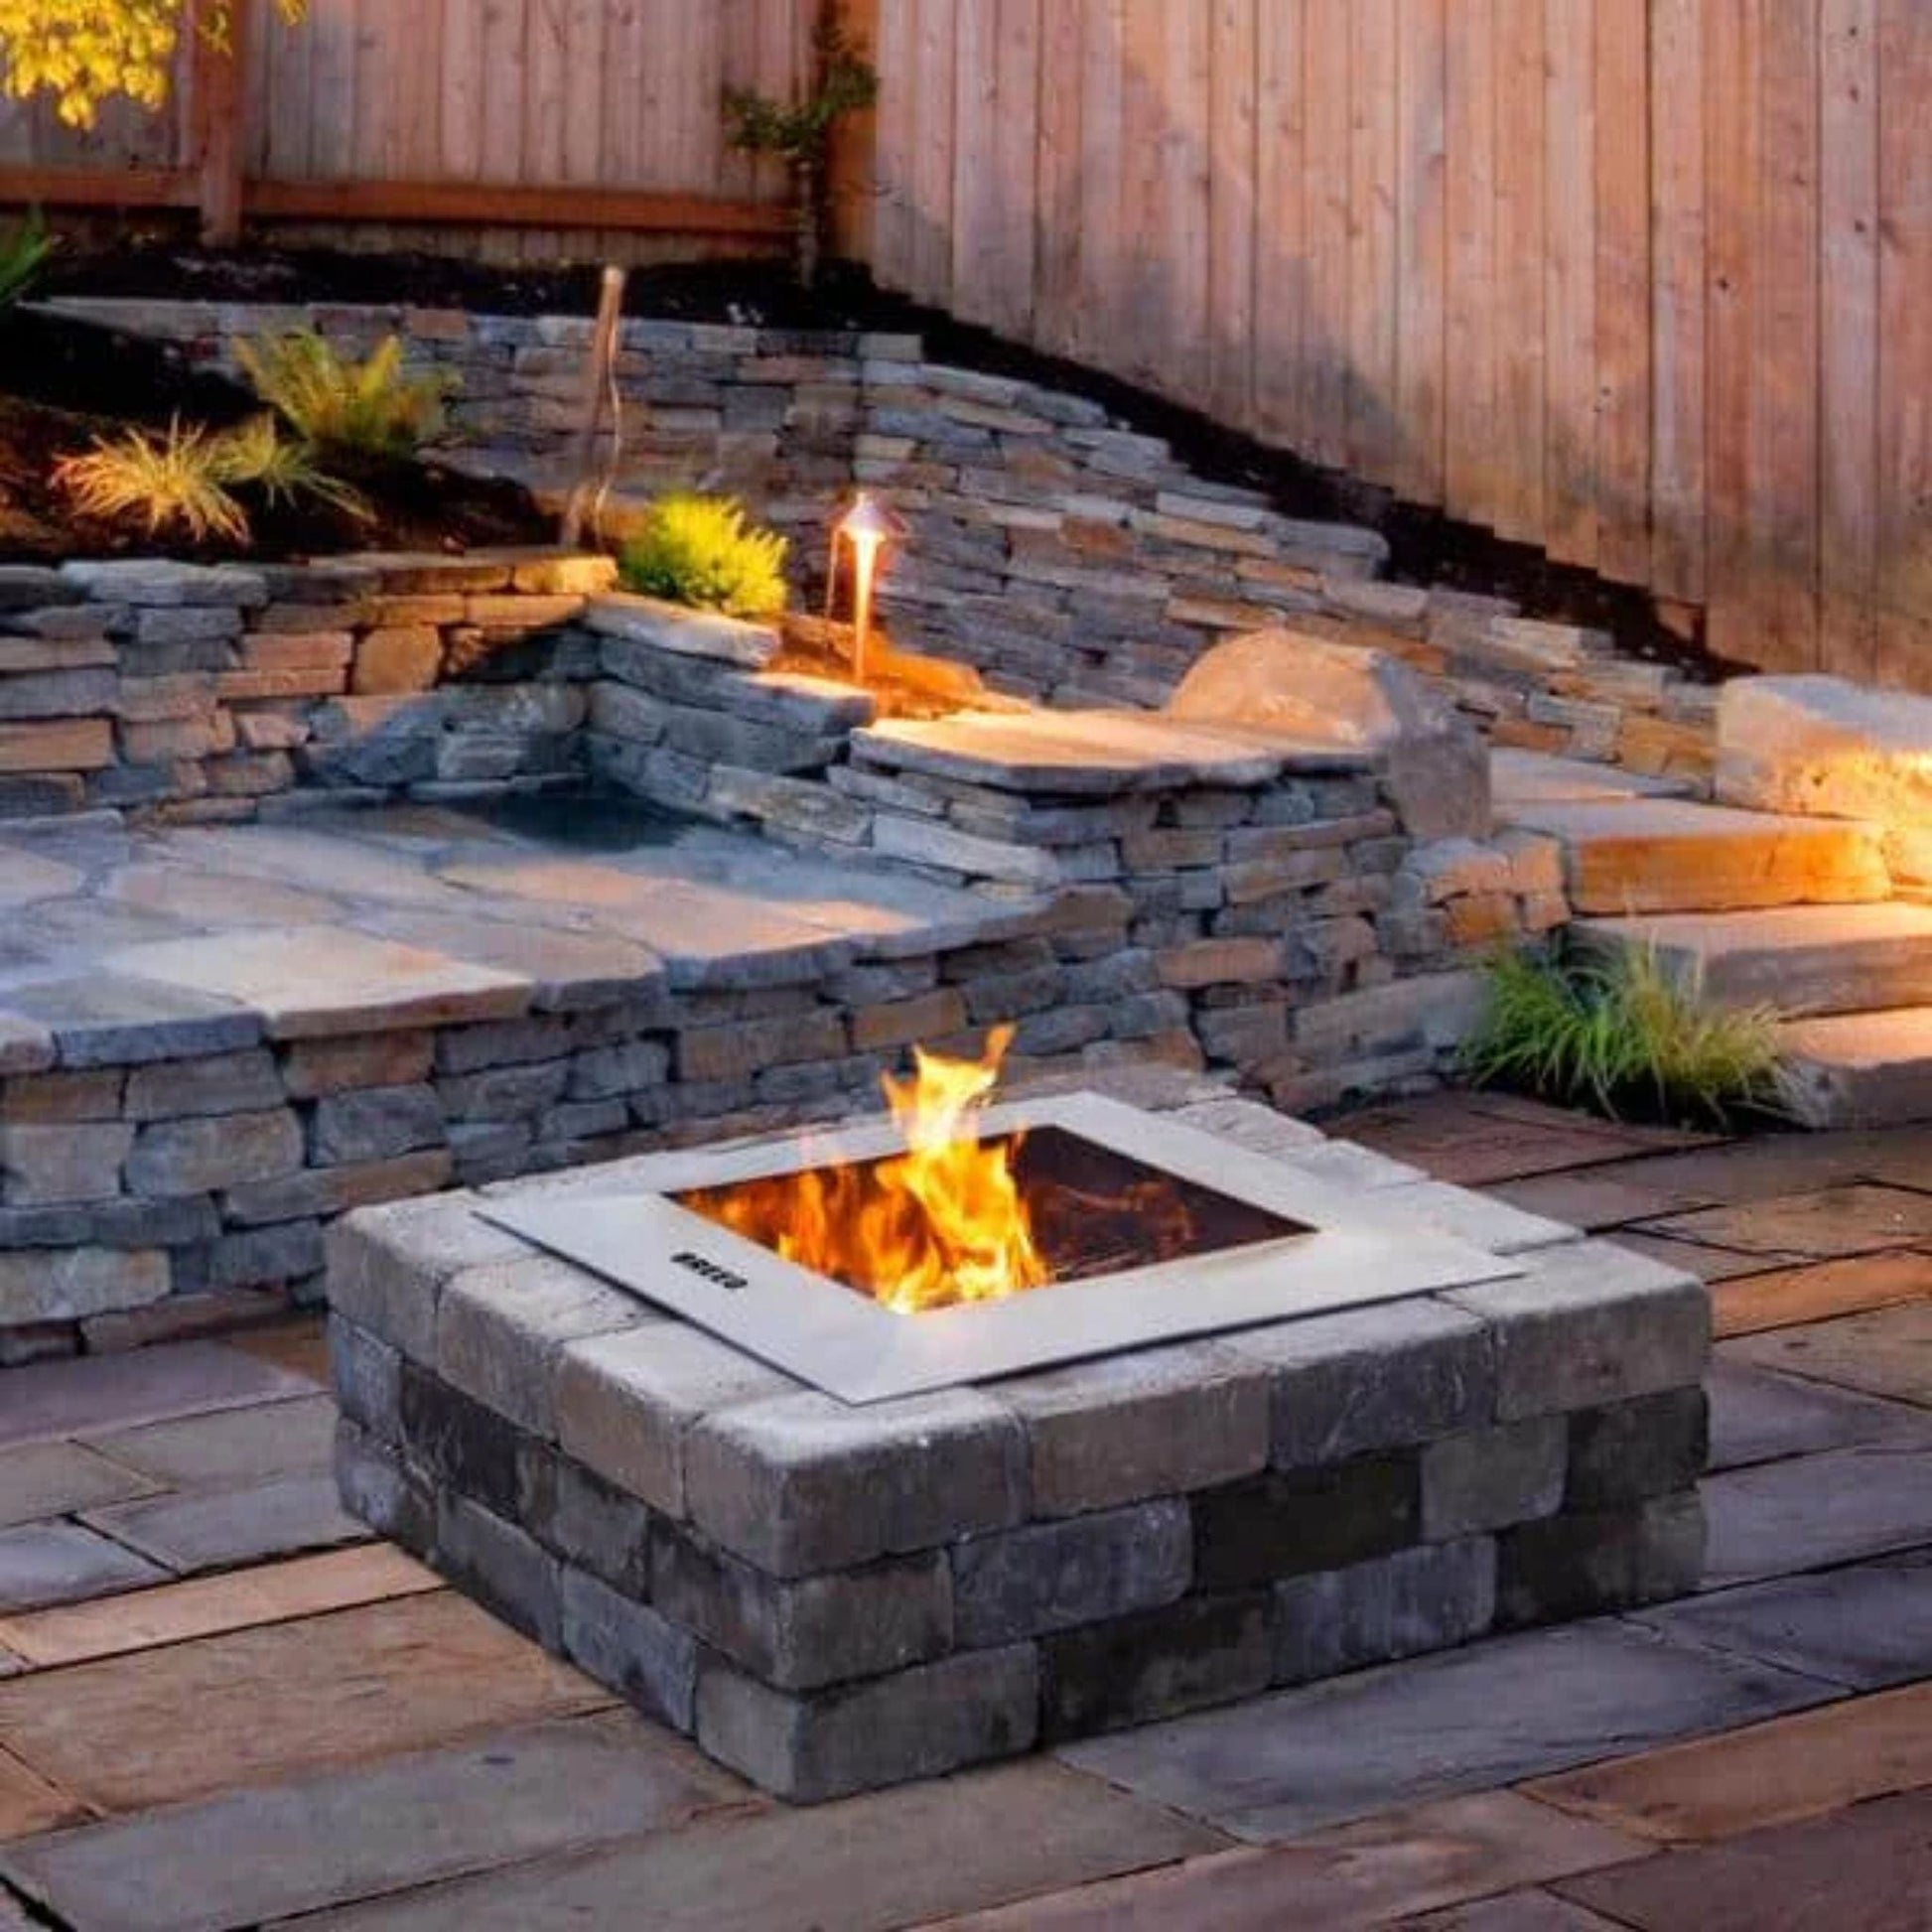 Zentro 24" Square Stainless Steel Smokeless Fire Pit Insert With Lid